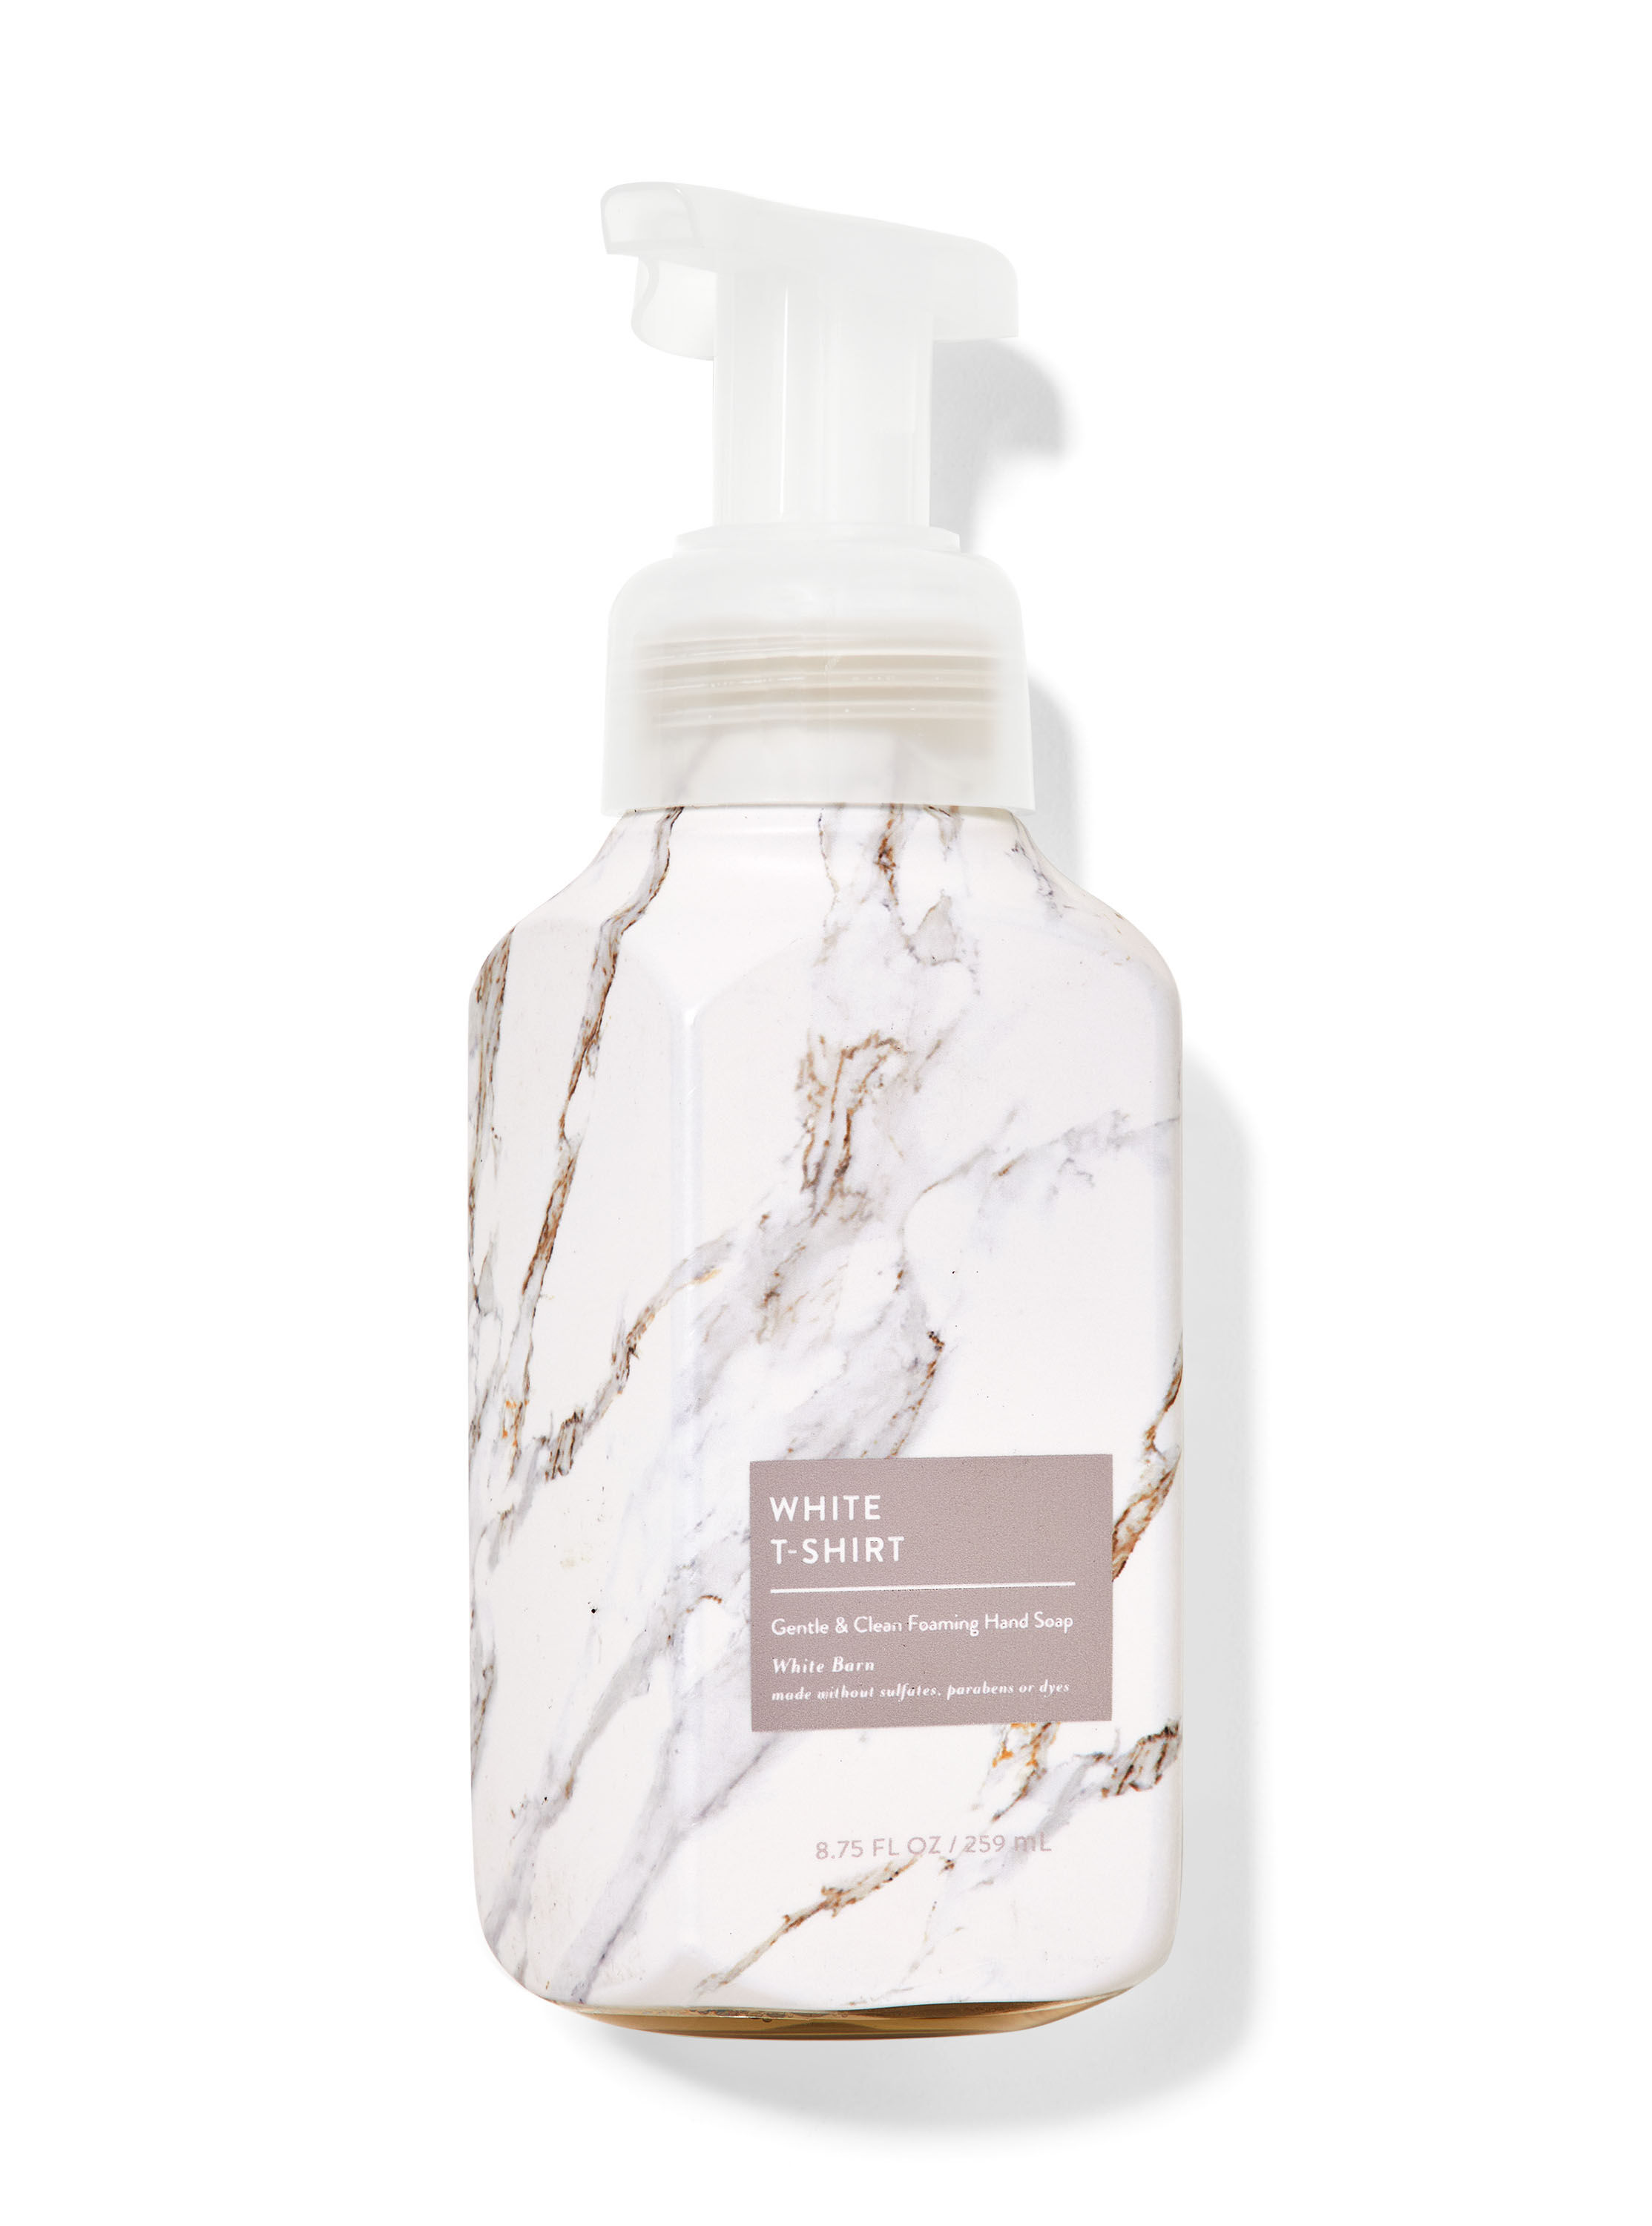 White T-Shirt Gentle & Clean Foaming Hand Soap